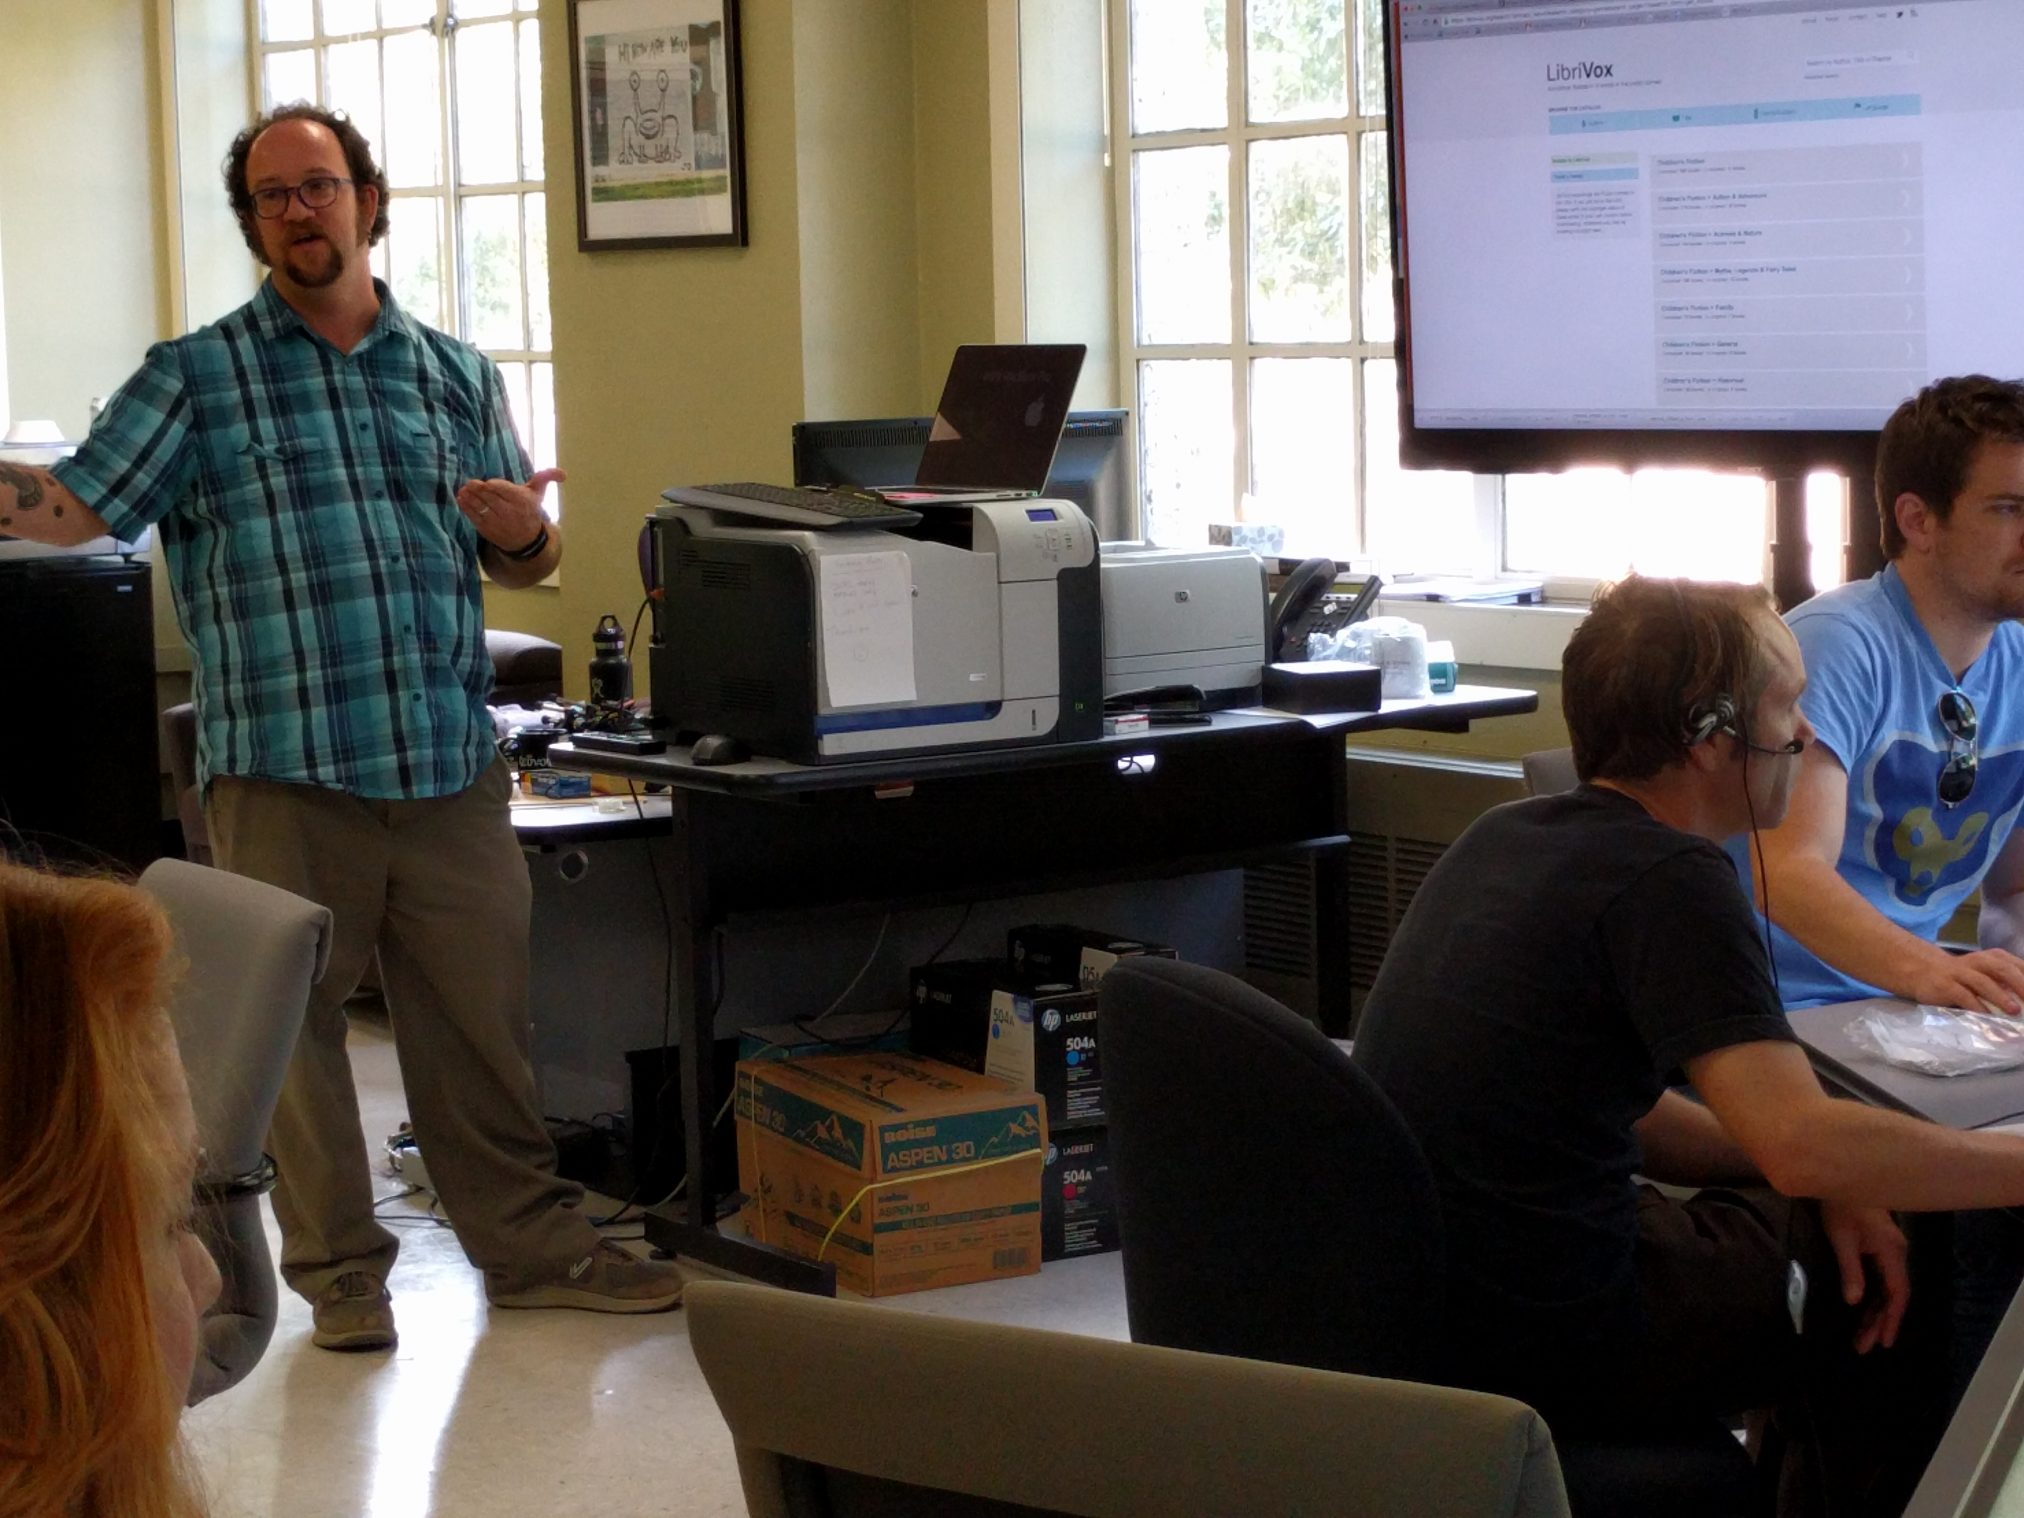 Will Burdette, Lab Coordinator, leads the workshop on audio recording, in Parlin Hall 102.